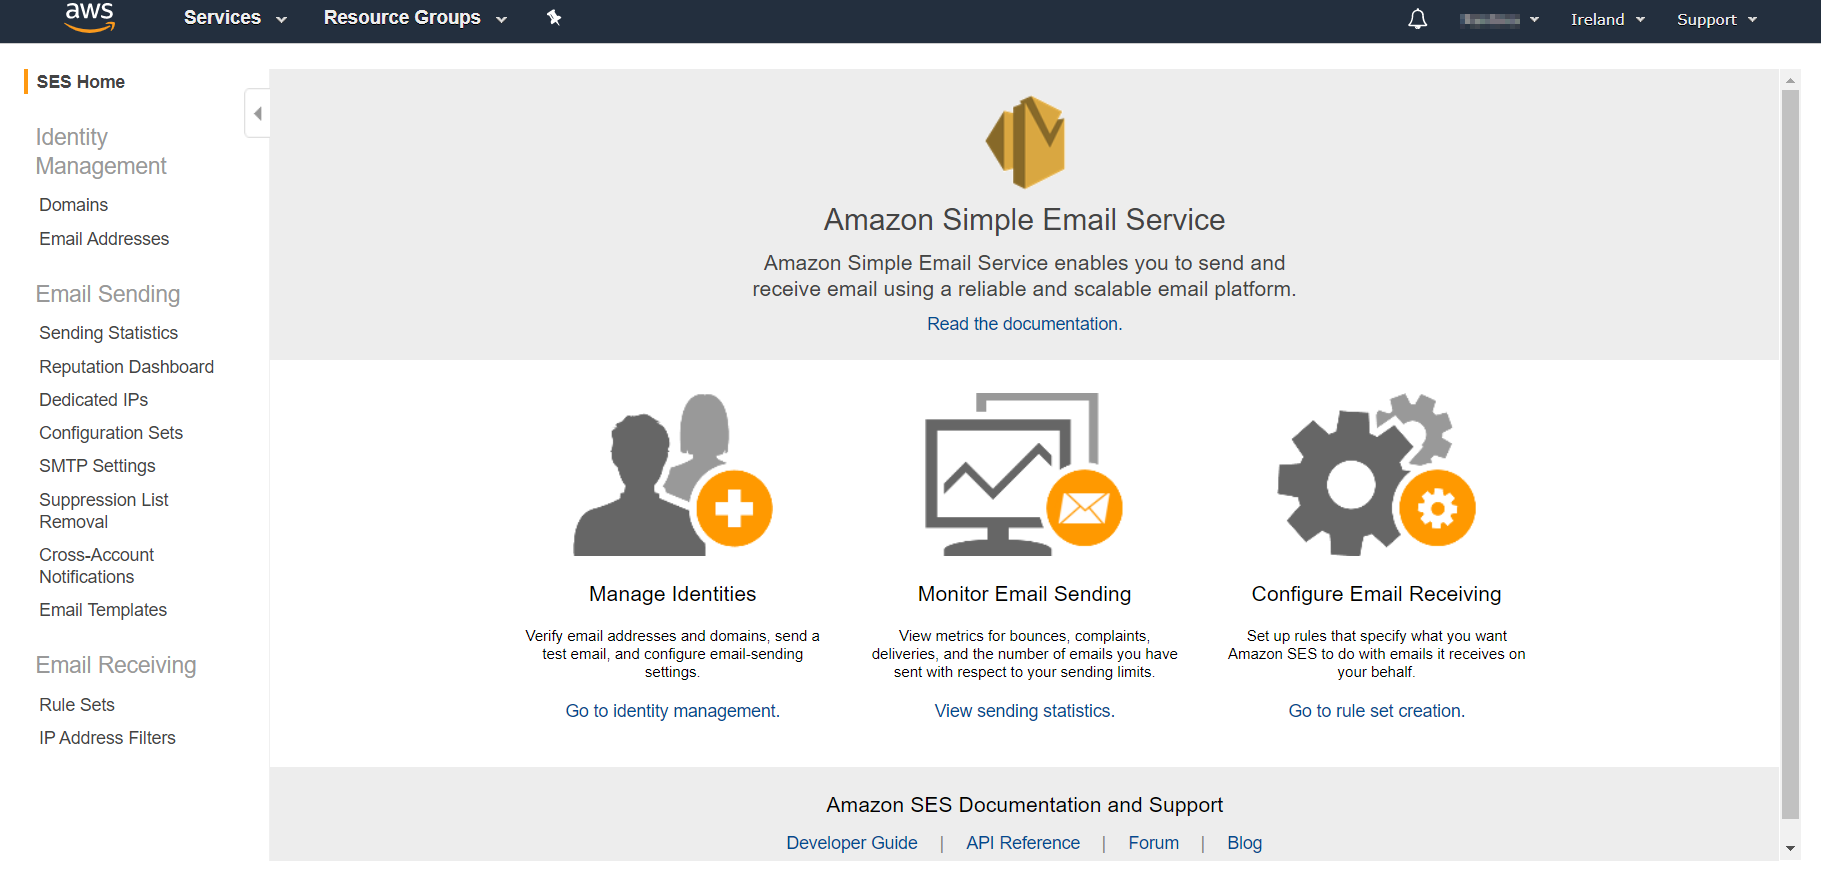 AWS Management Console Home page 